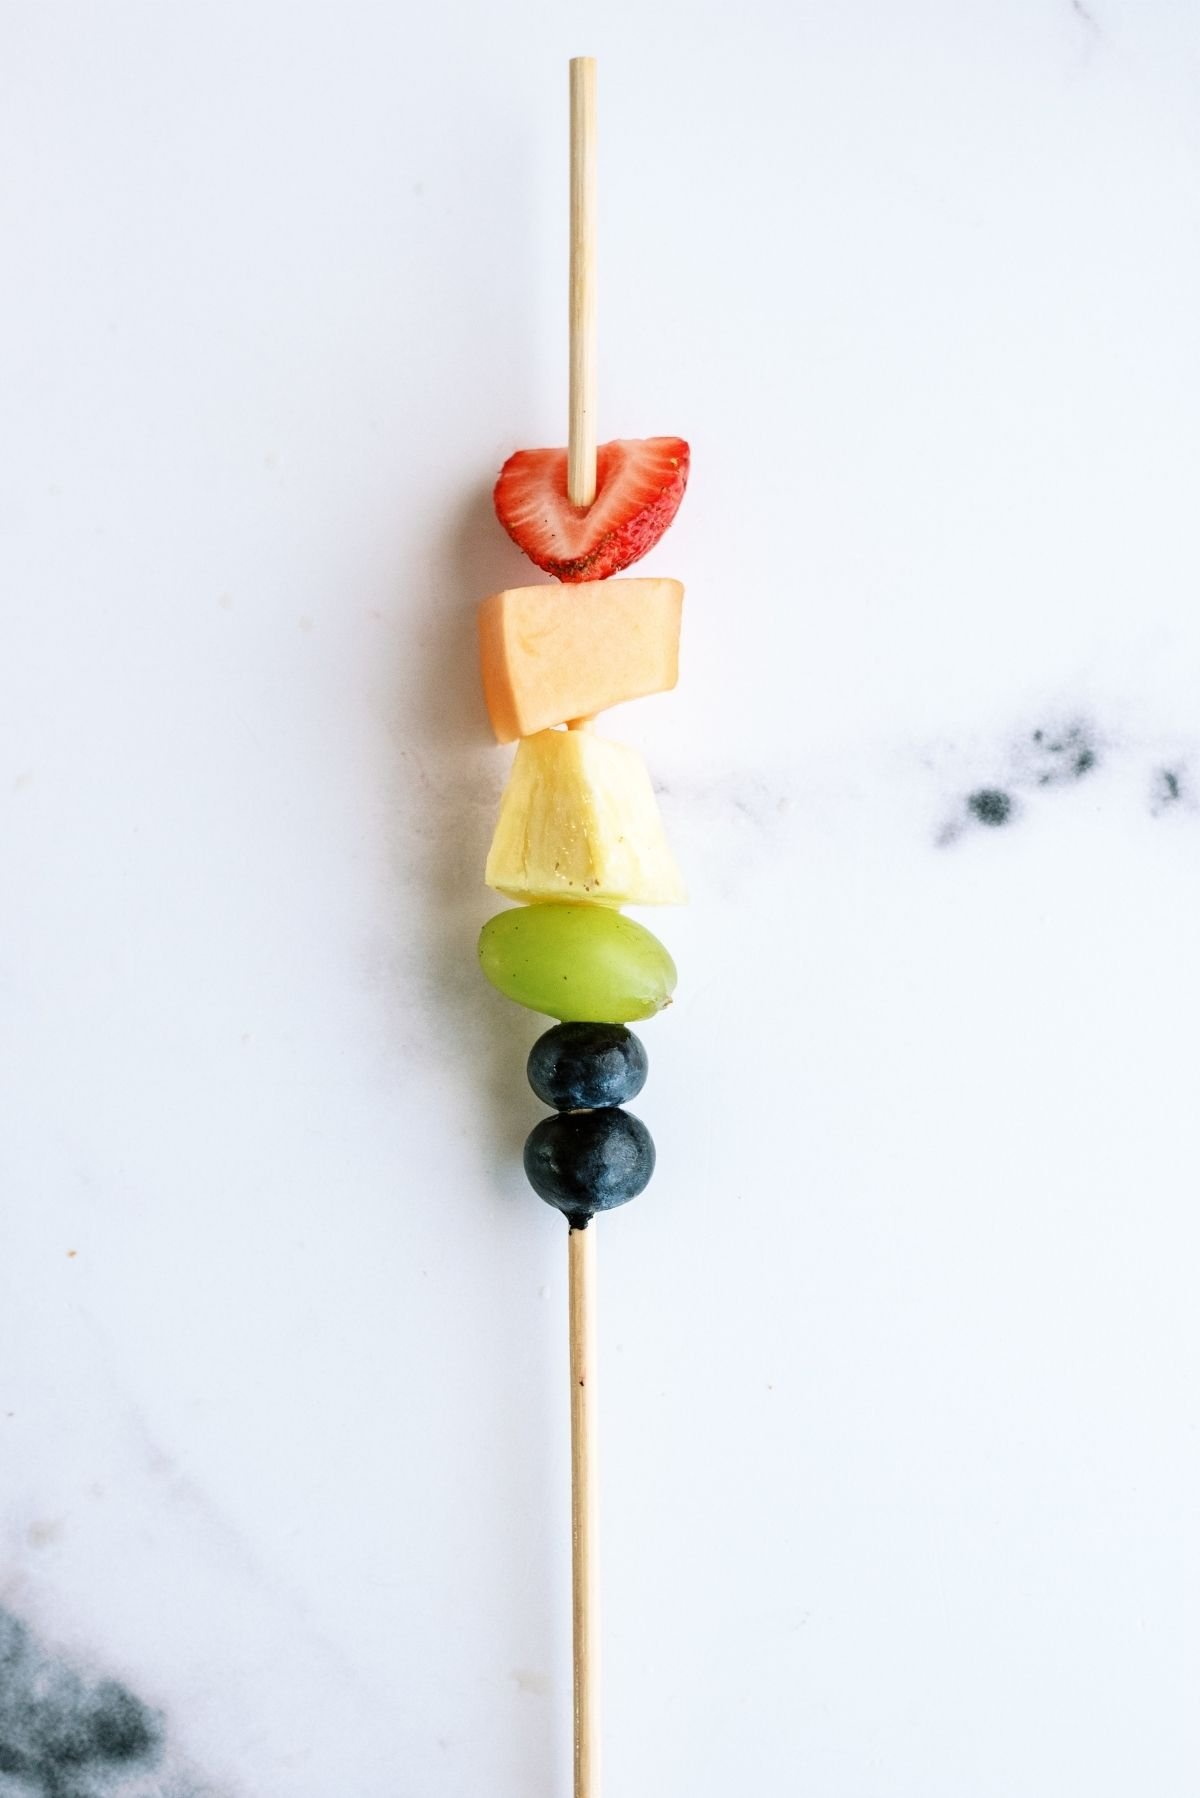 Kabob stick with fruit on it